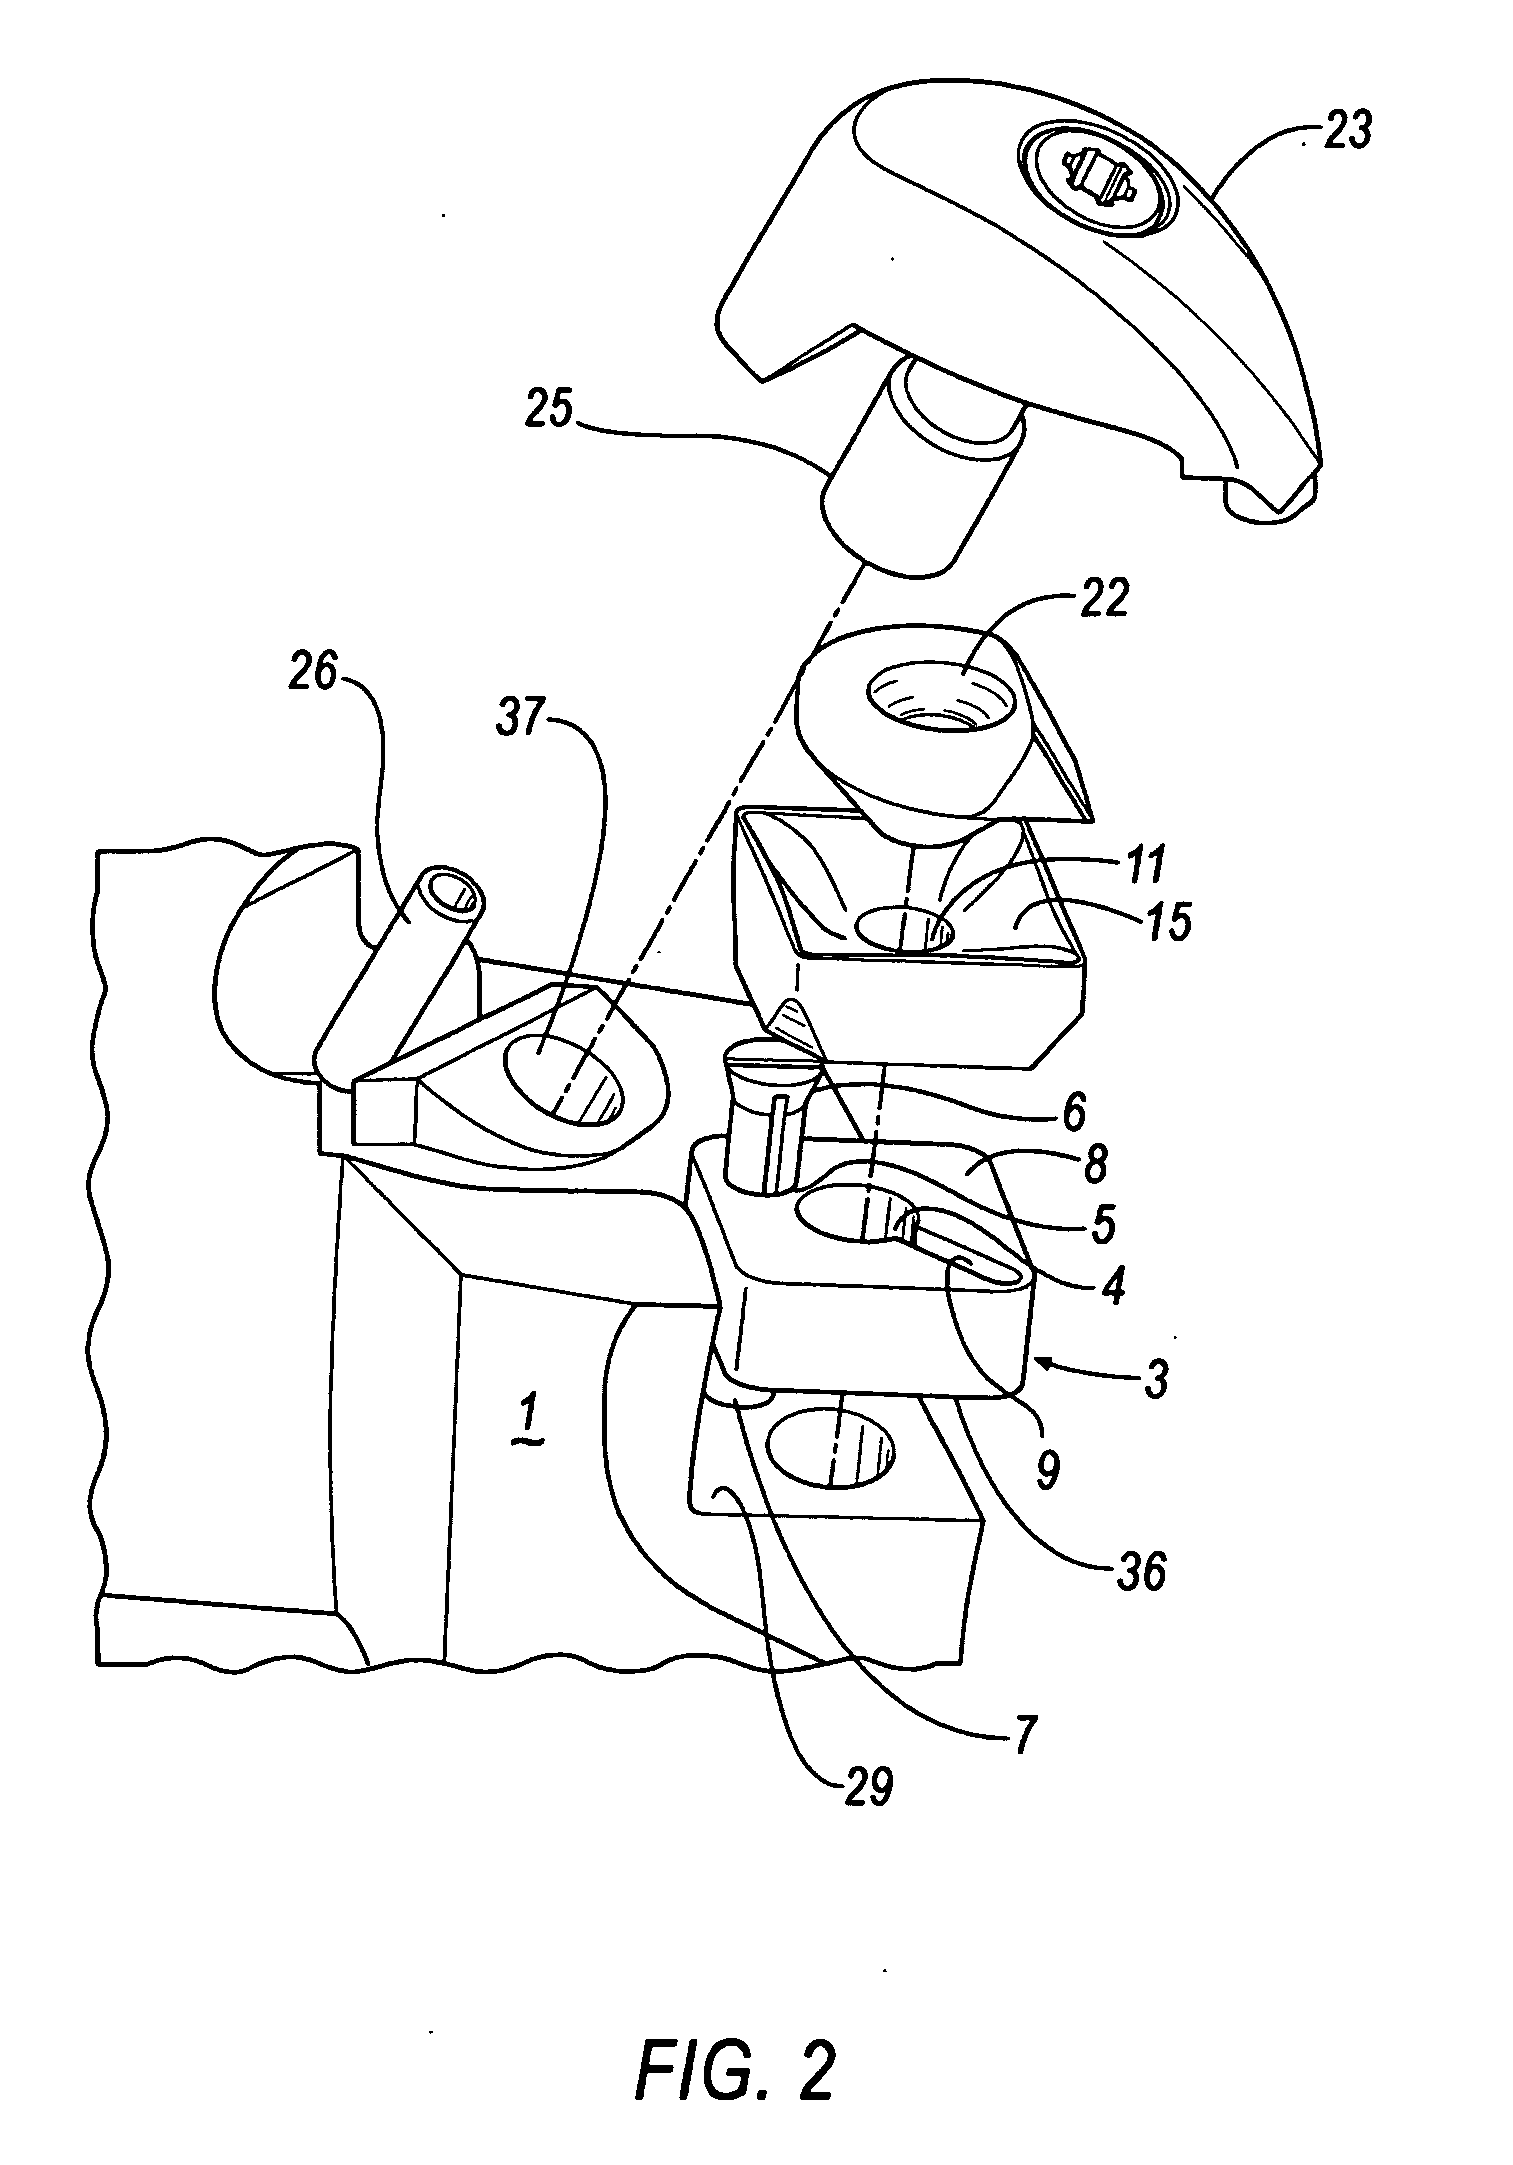 Metal cutting system for effective coolant delivery